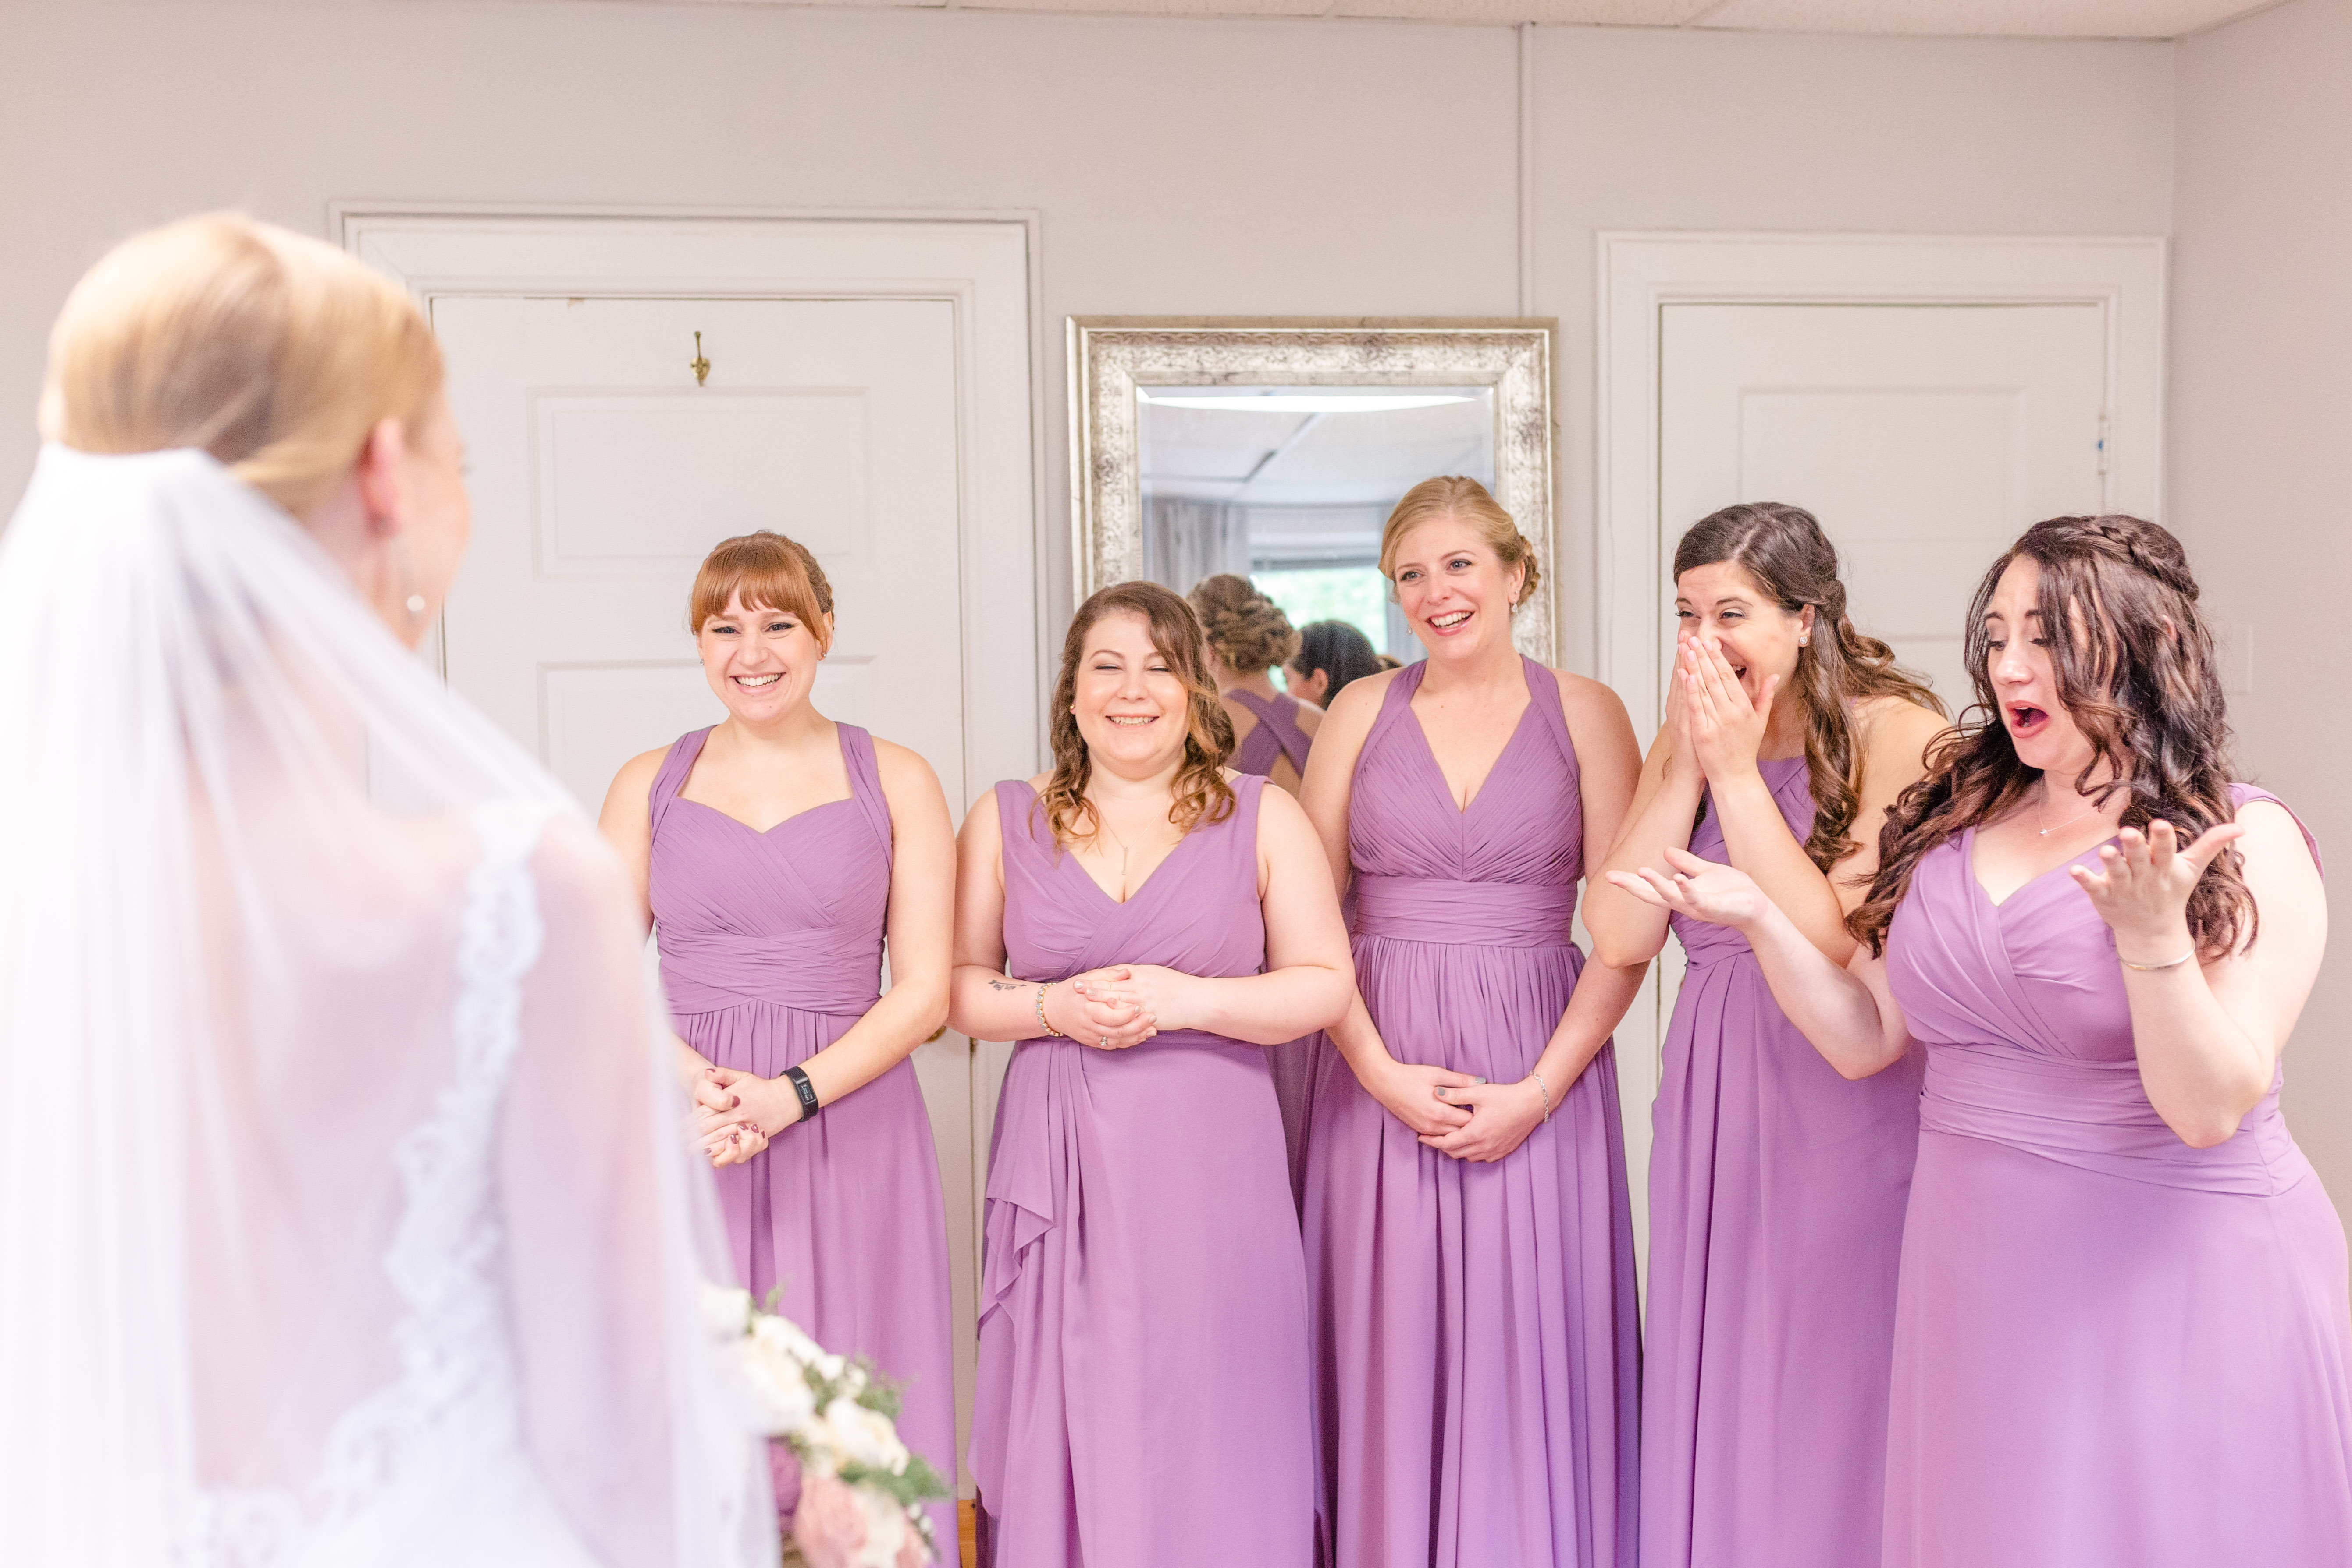 bridesmaids seeing bride for the first time, very excited